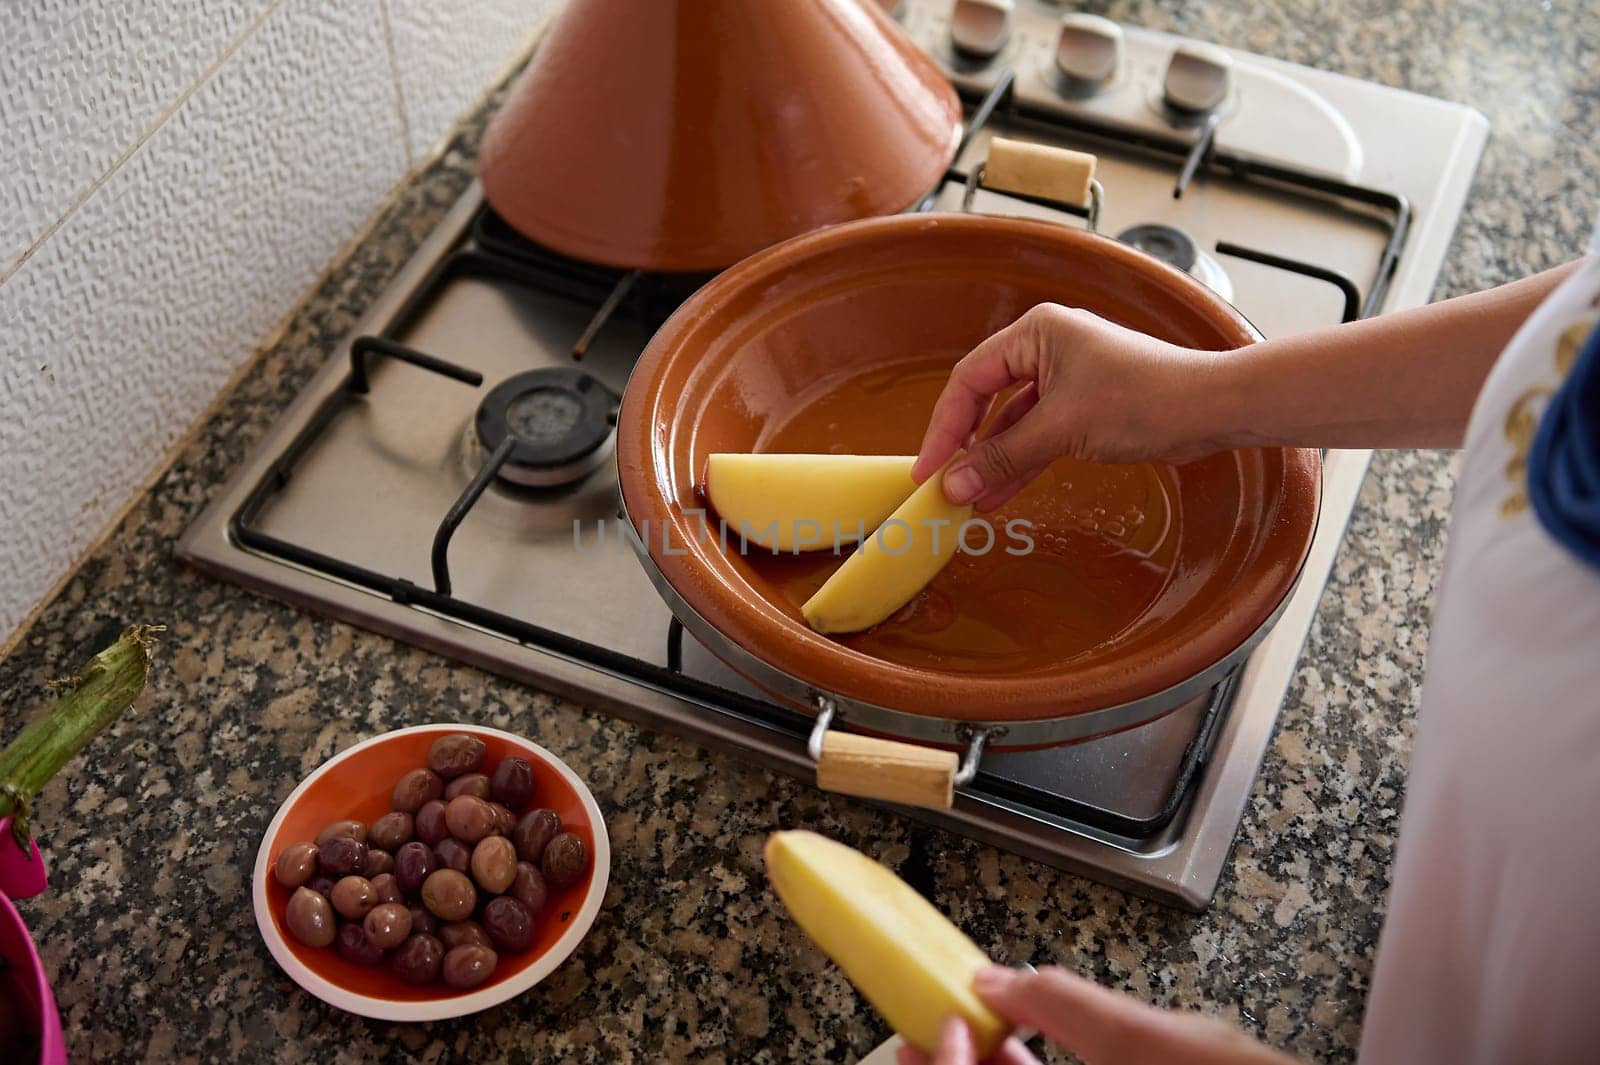 Top view of a housewife cooking tajine, putting slices of organic potato inside a clay dish. Moroccan traditional food by artgf